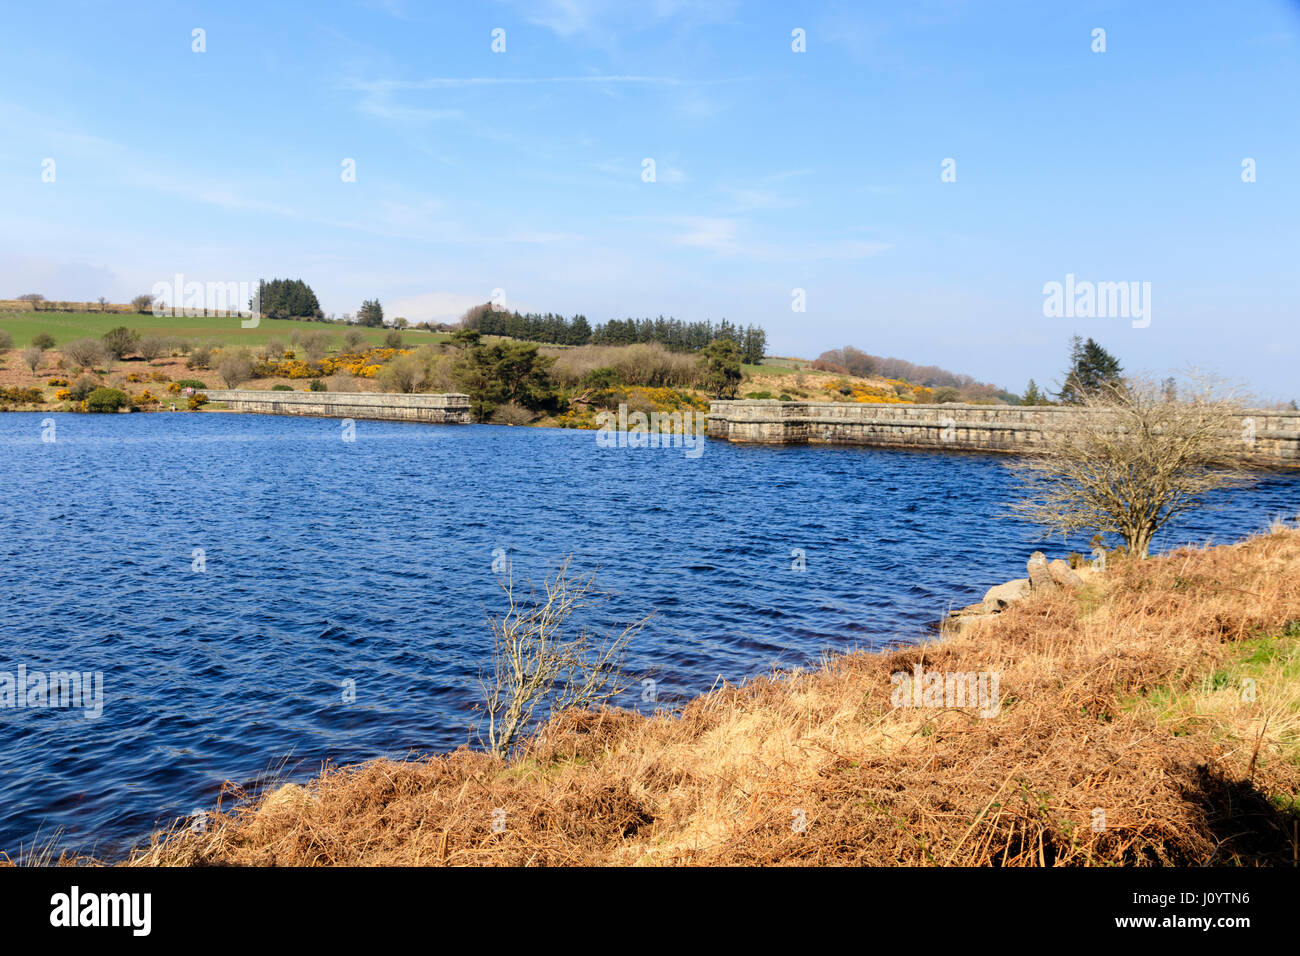 The dam walls and central spillway at Fernworthy Reservoir, Dartmoor on an early Spring day Stock Photo